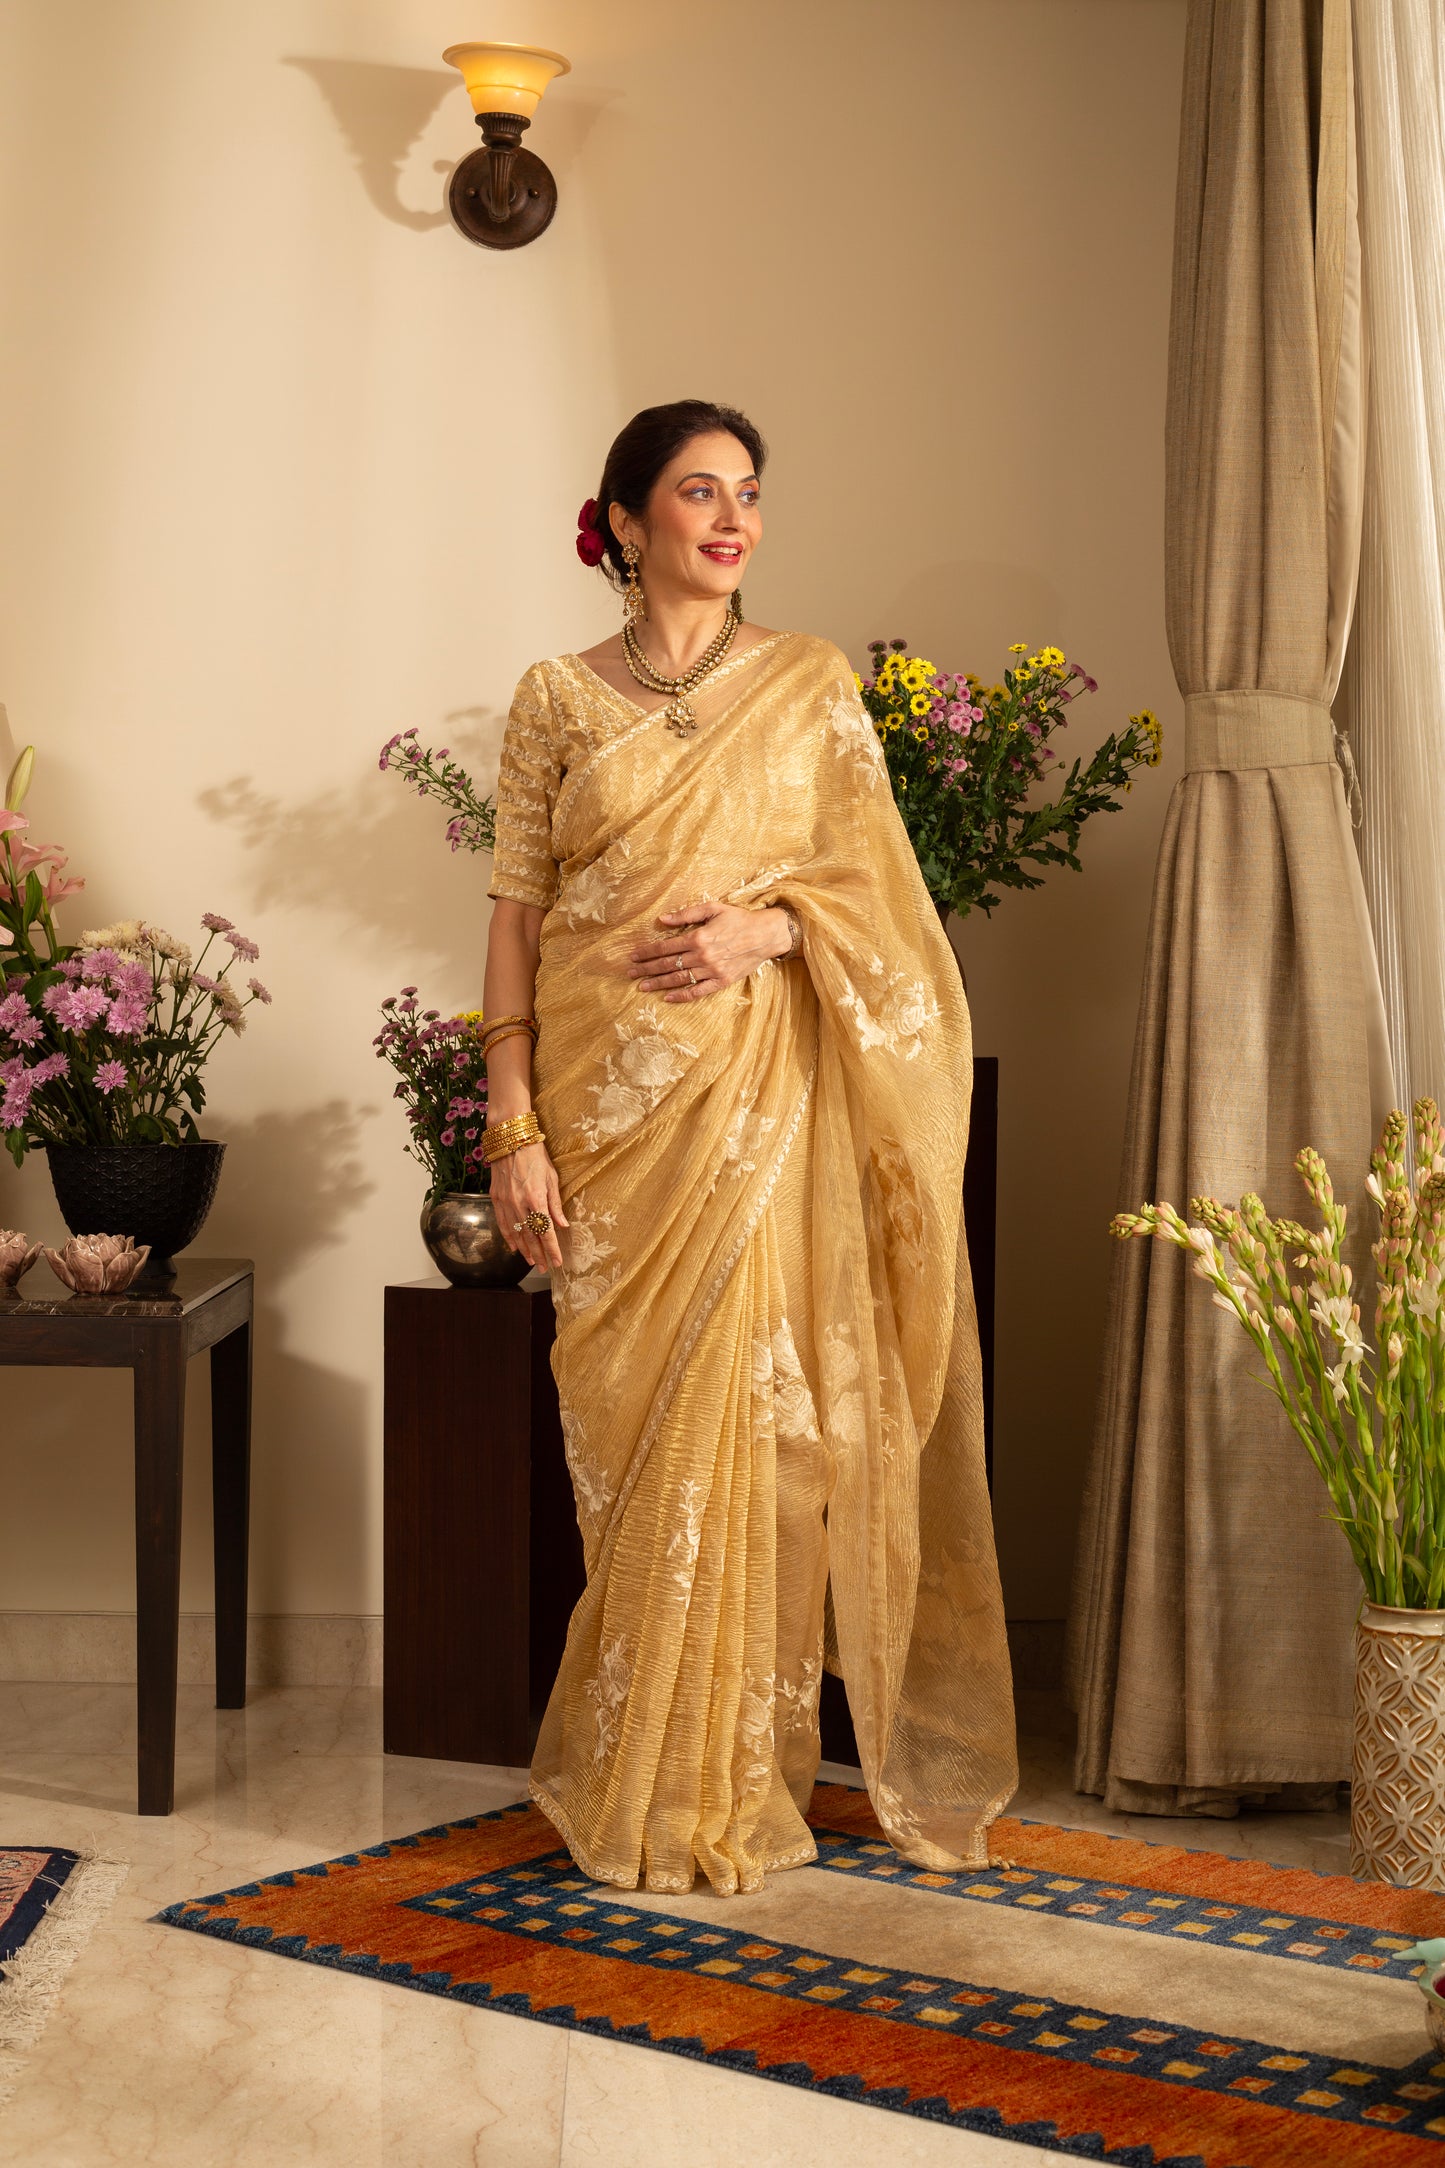 Gulab Soft Gold Pure Silk Tissue Handloom Saree with Parsi Embroidery